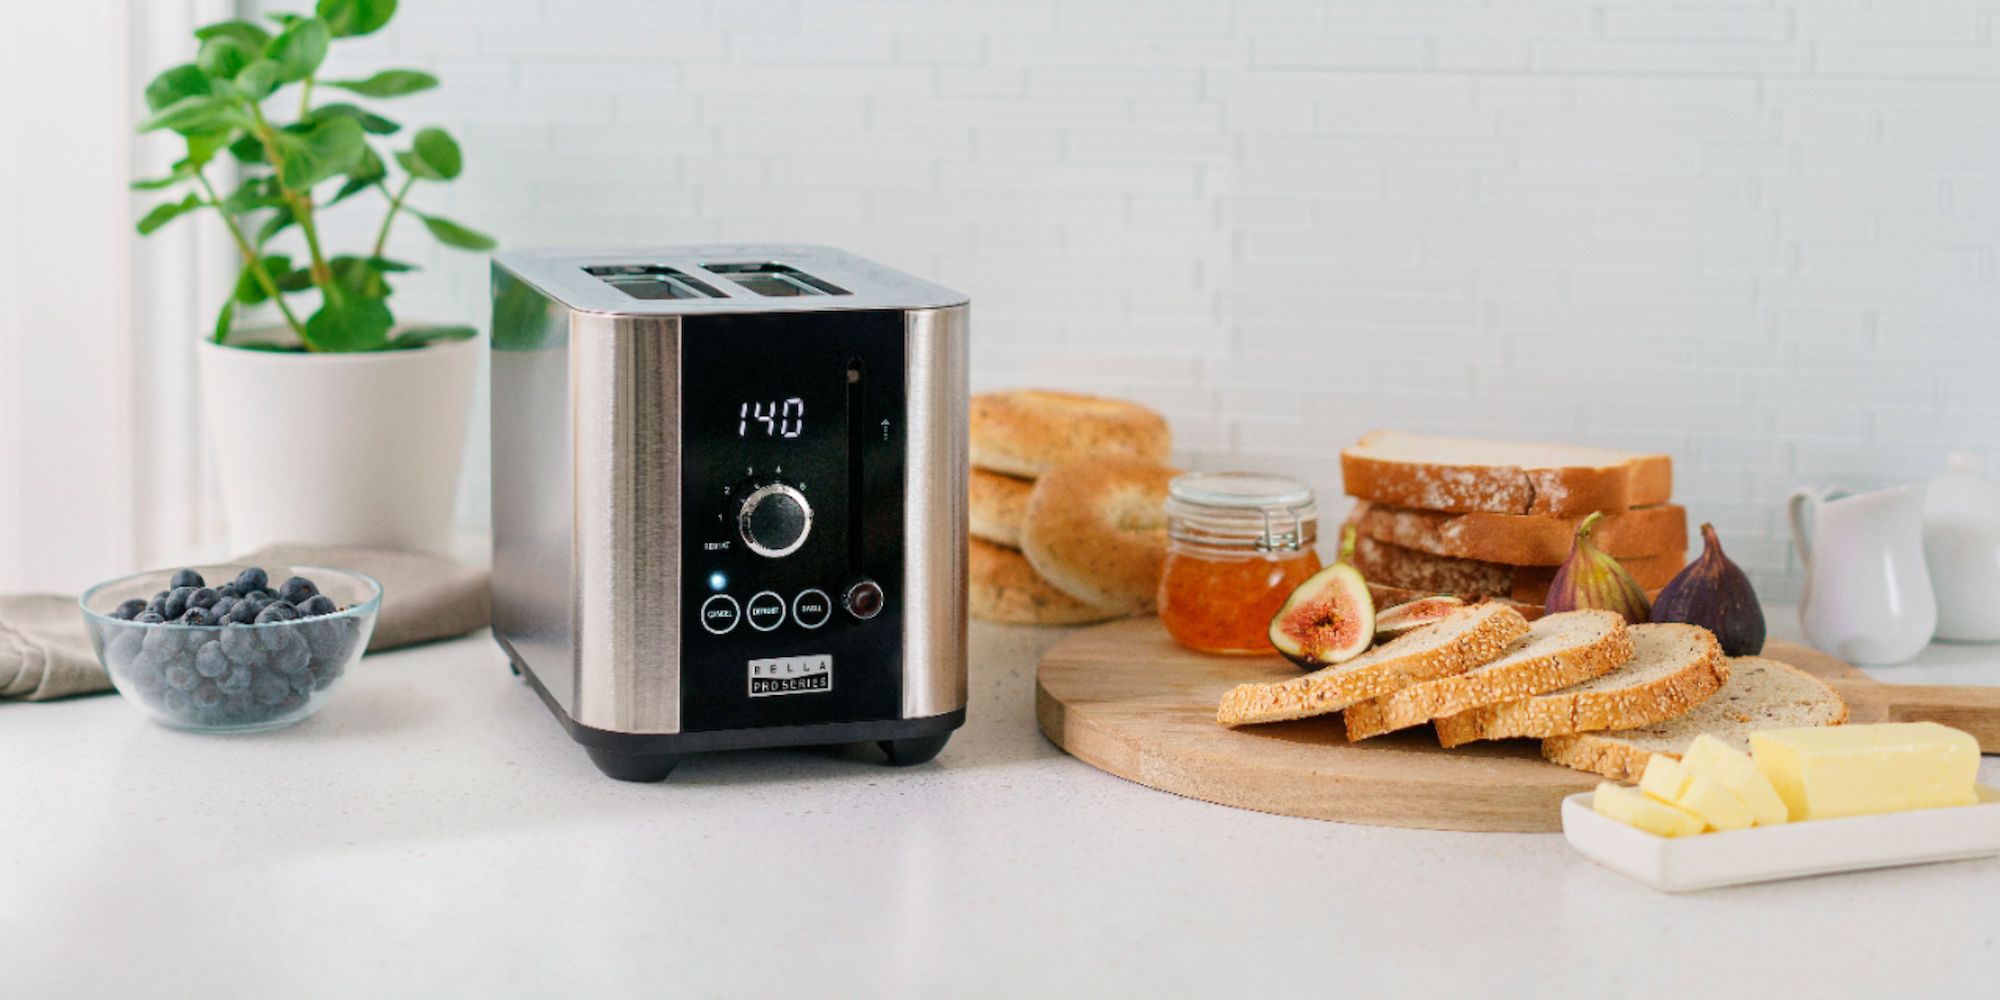 https://9to5toys.com/wp-content/uploads/sites/5/2021/02/Bella-Pro-Series-2-Slice-Digital-Touchscreen-Toaster.jpg